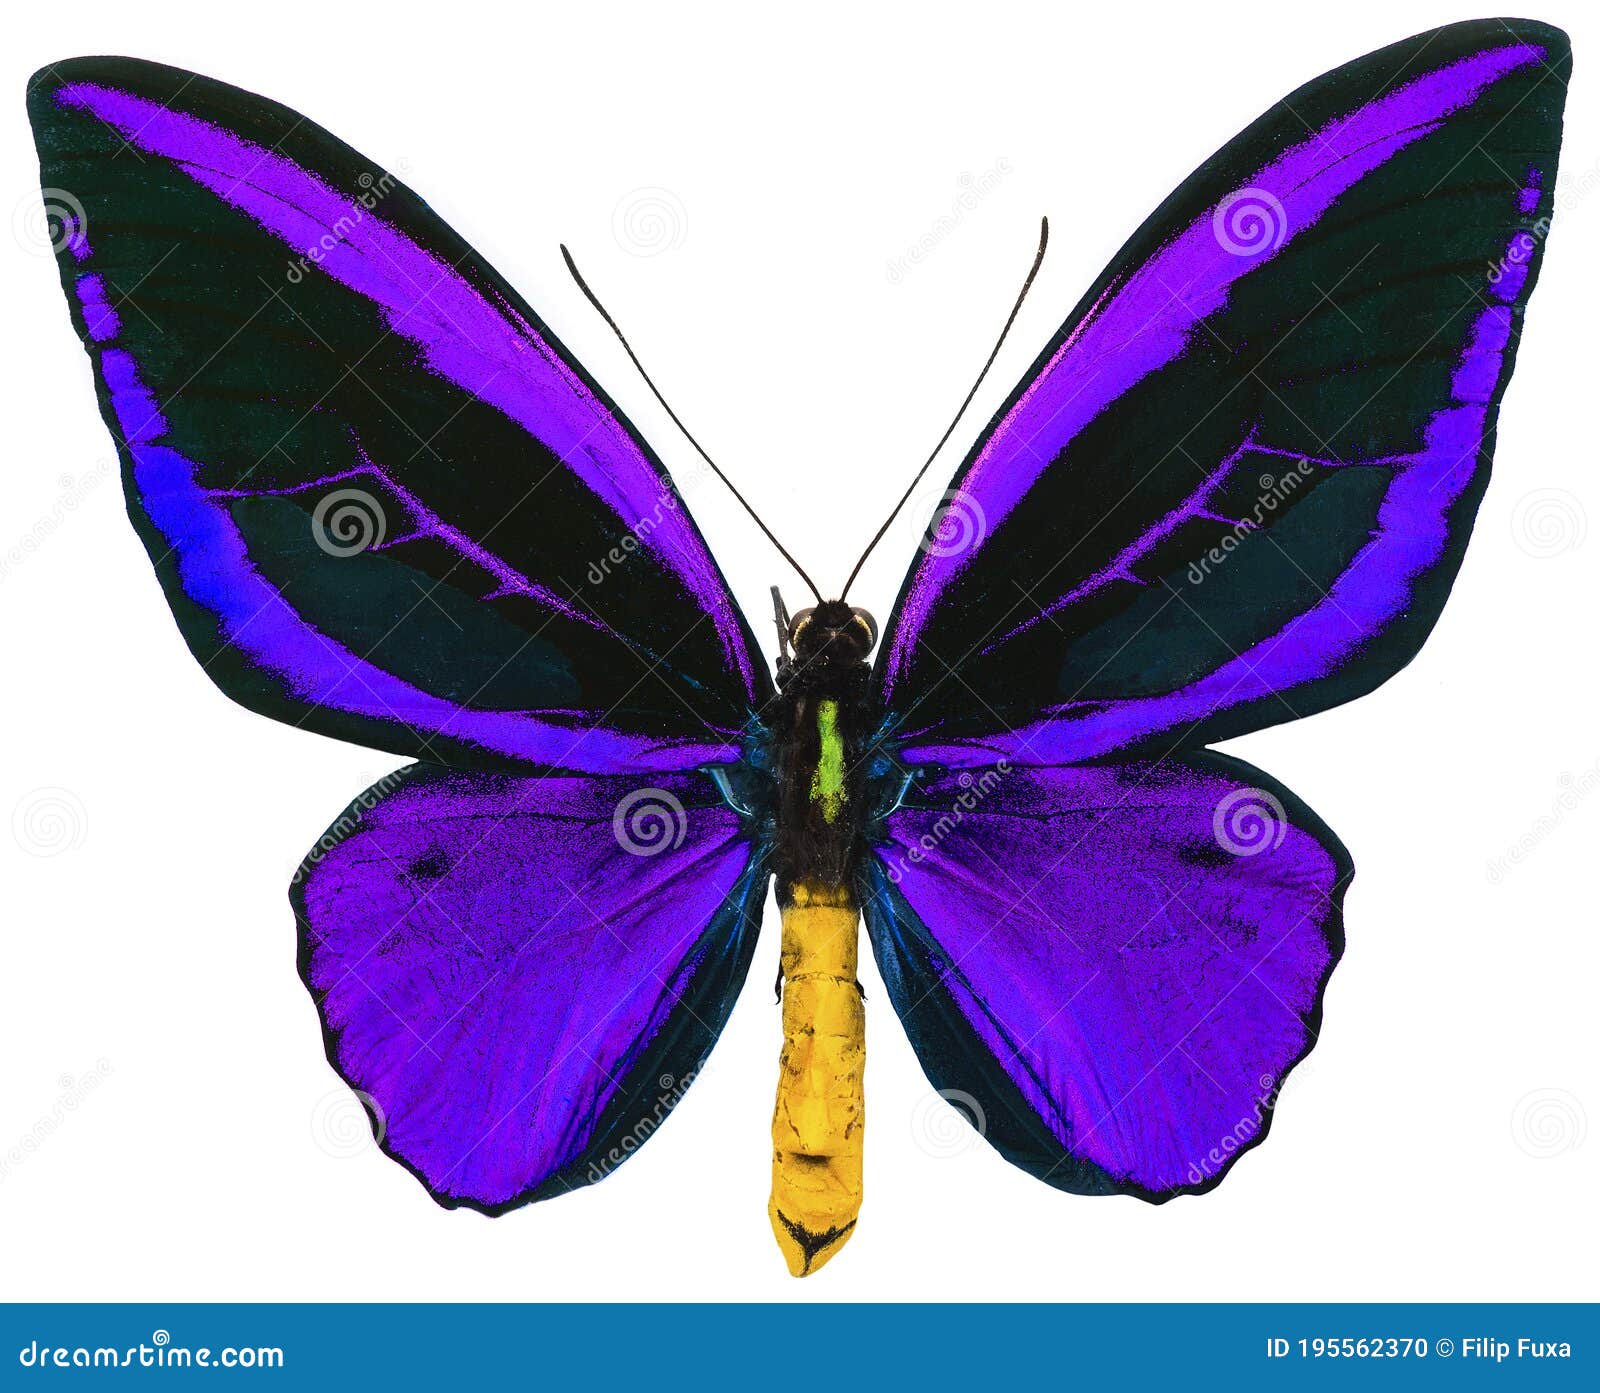 Ornithoptera Priamus Tropical Butterfly Isolated Stock Photo ...